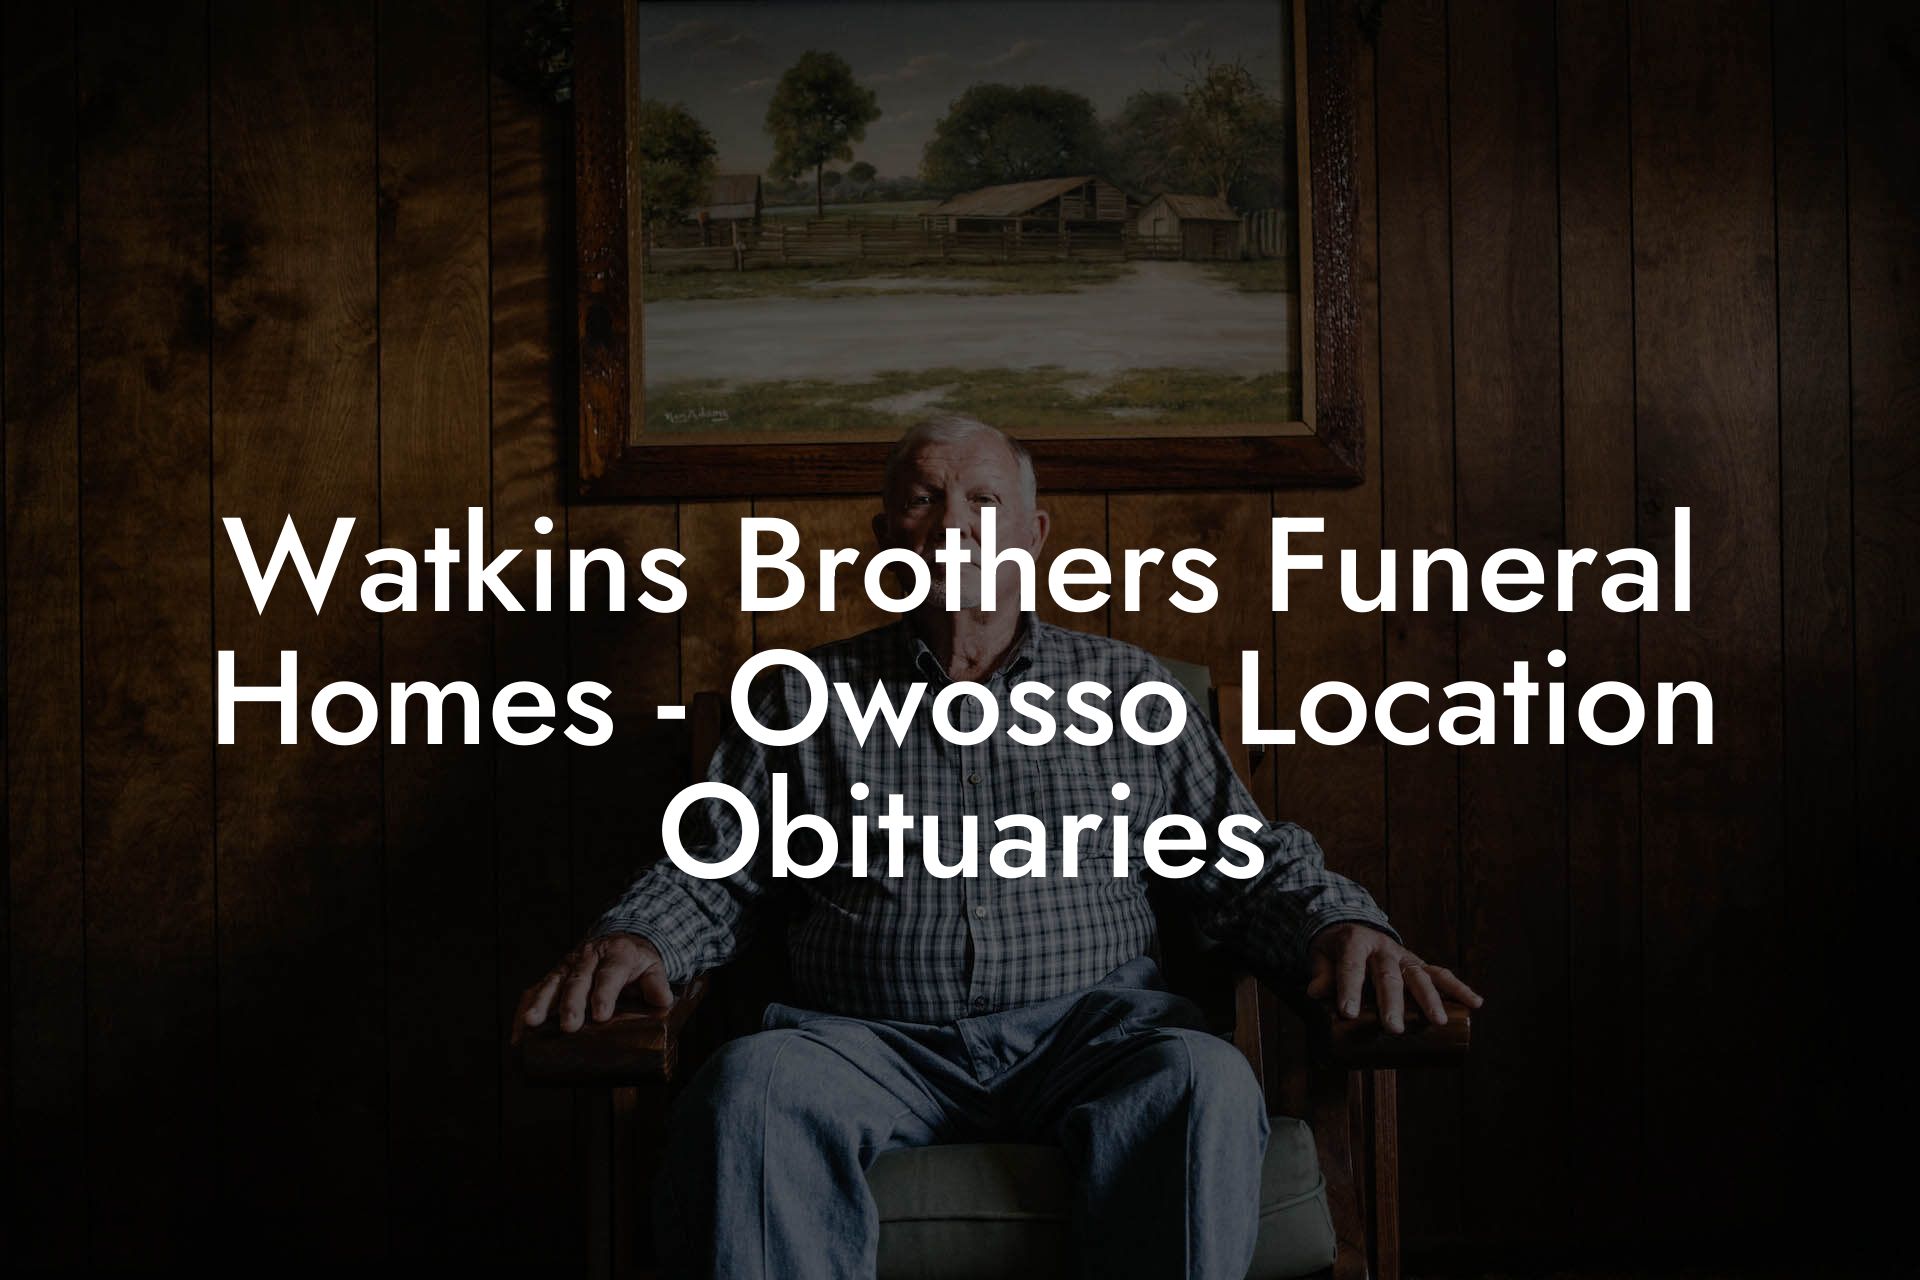 Watkins Brothers Funeral Homes - Owosso Location Obituaries